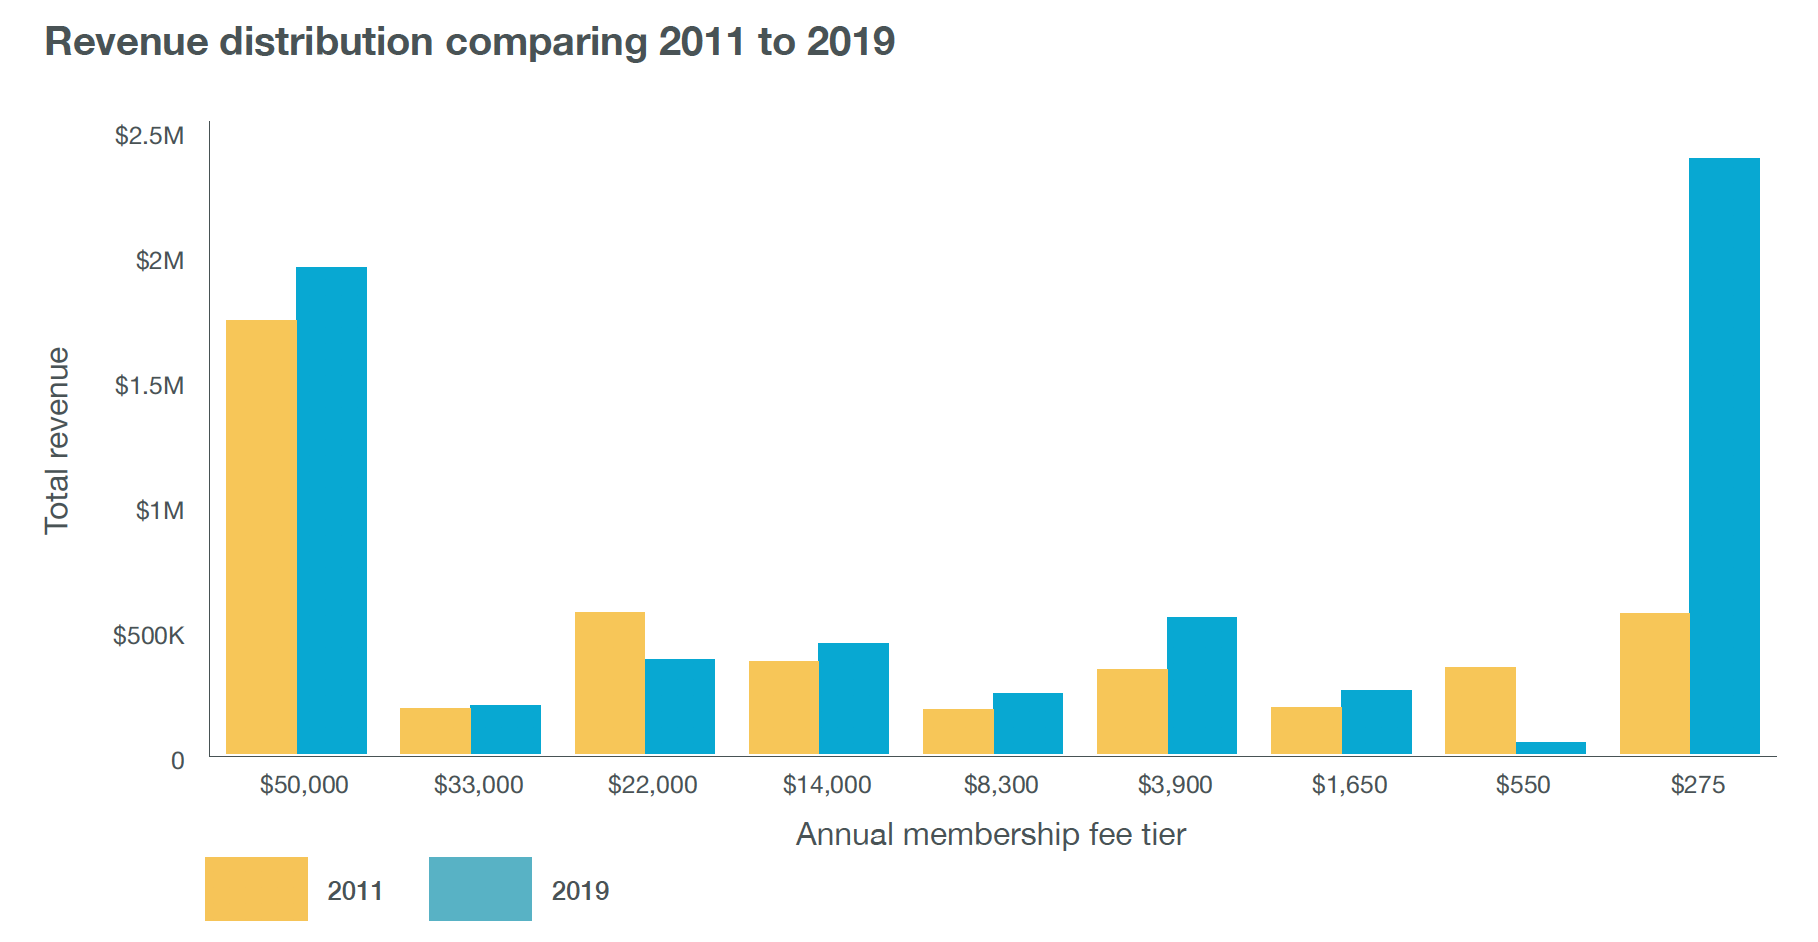 Revenue distribution by membership fee tier, comparing 2011 with 2019